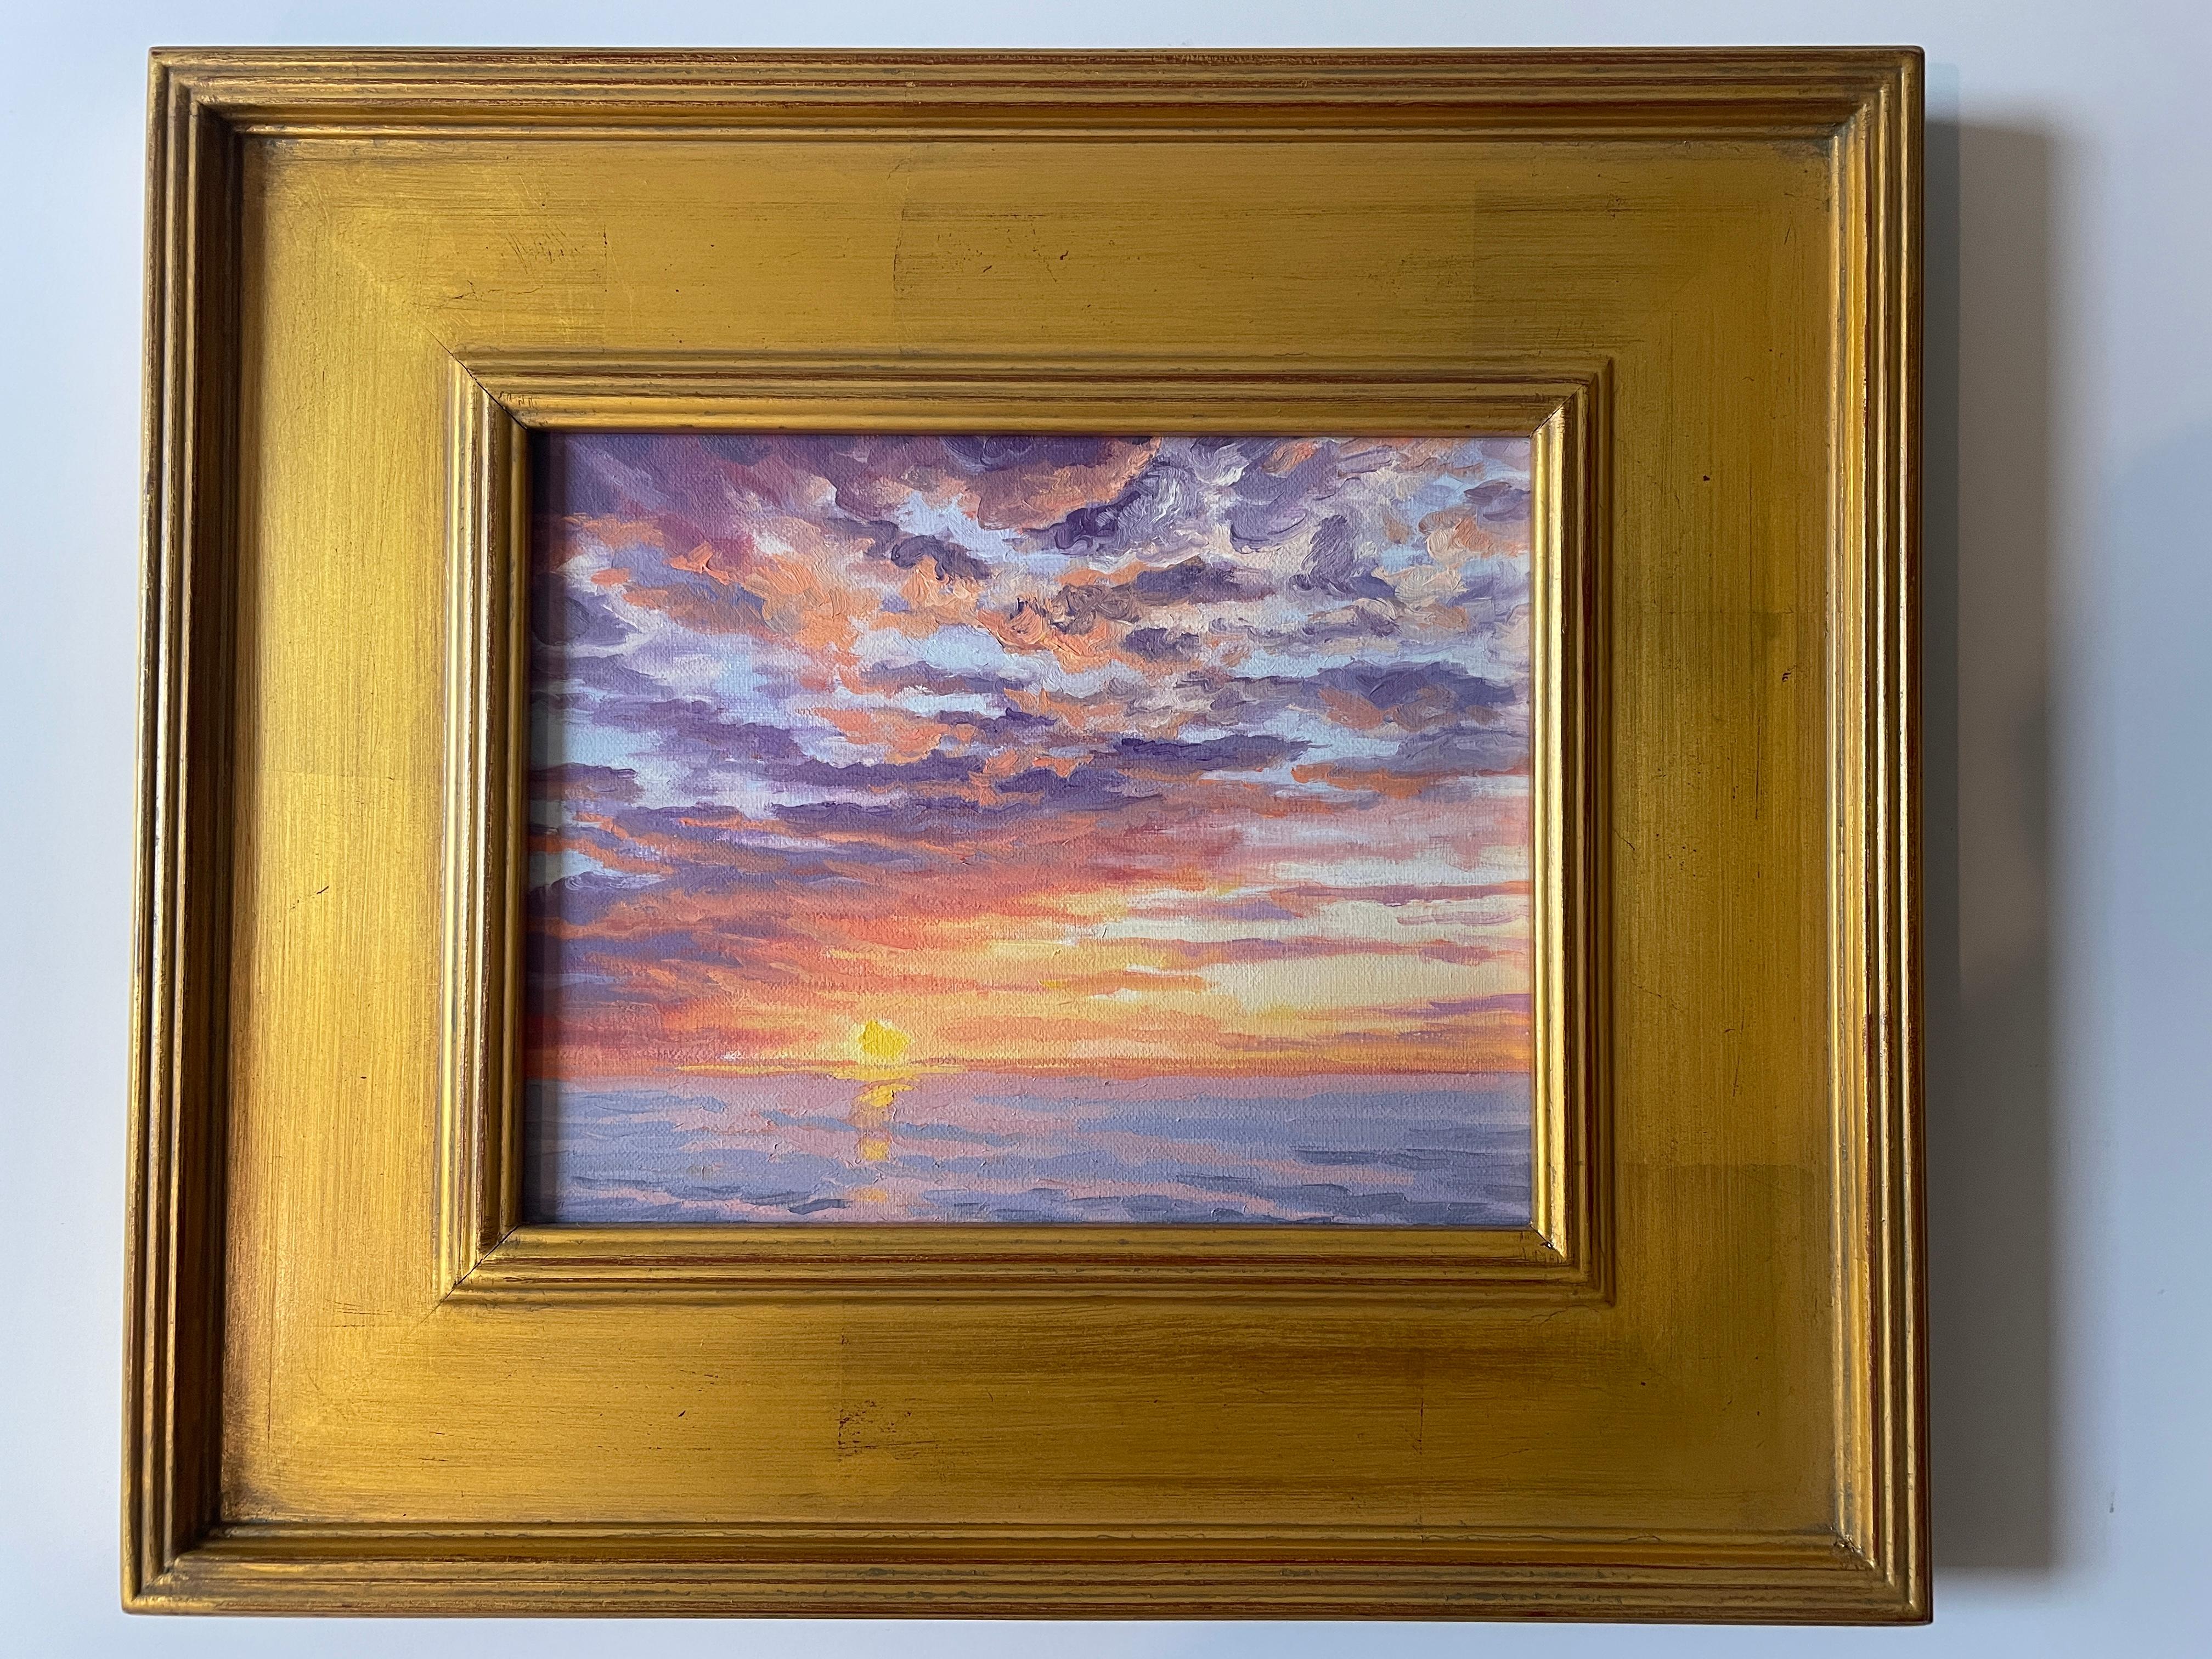 As the Sun Drops Below the Horizon. Title - Last Light of Day - American Realist Painting by Carl Scorza